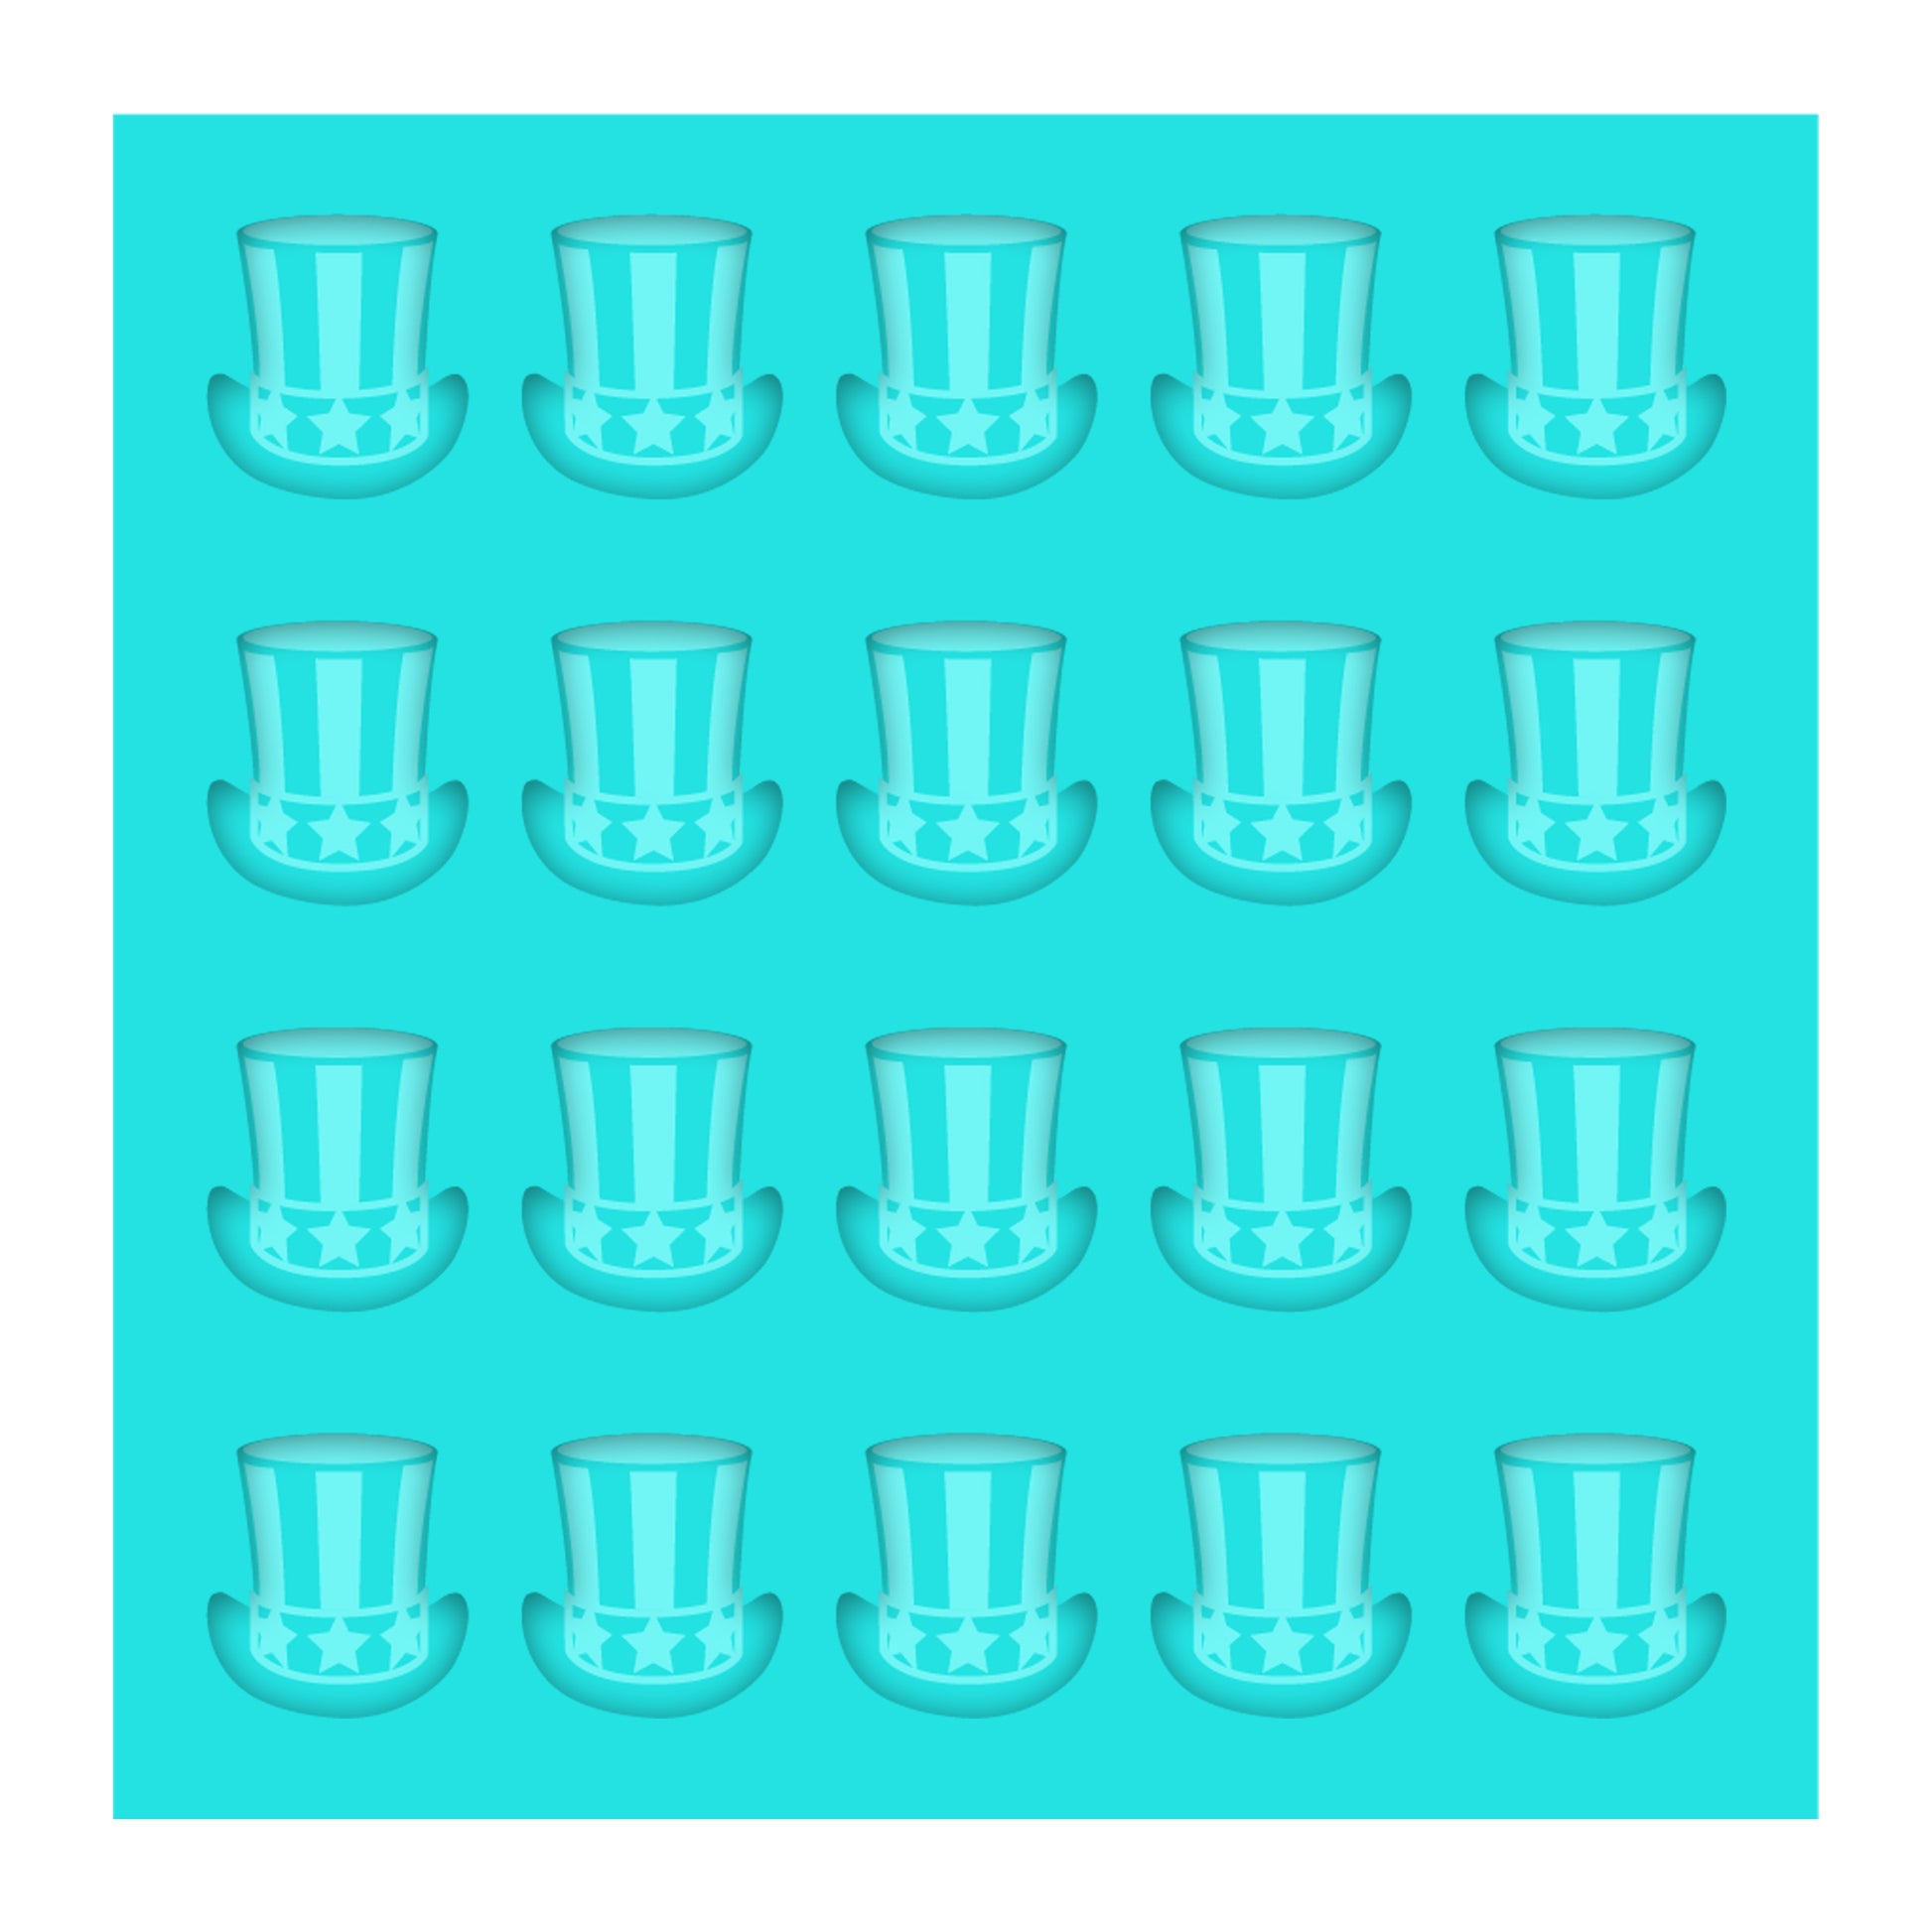 a picture of a set of cups on a blue background